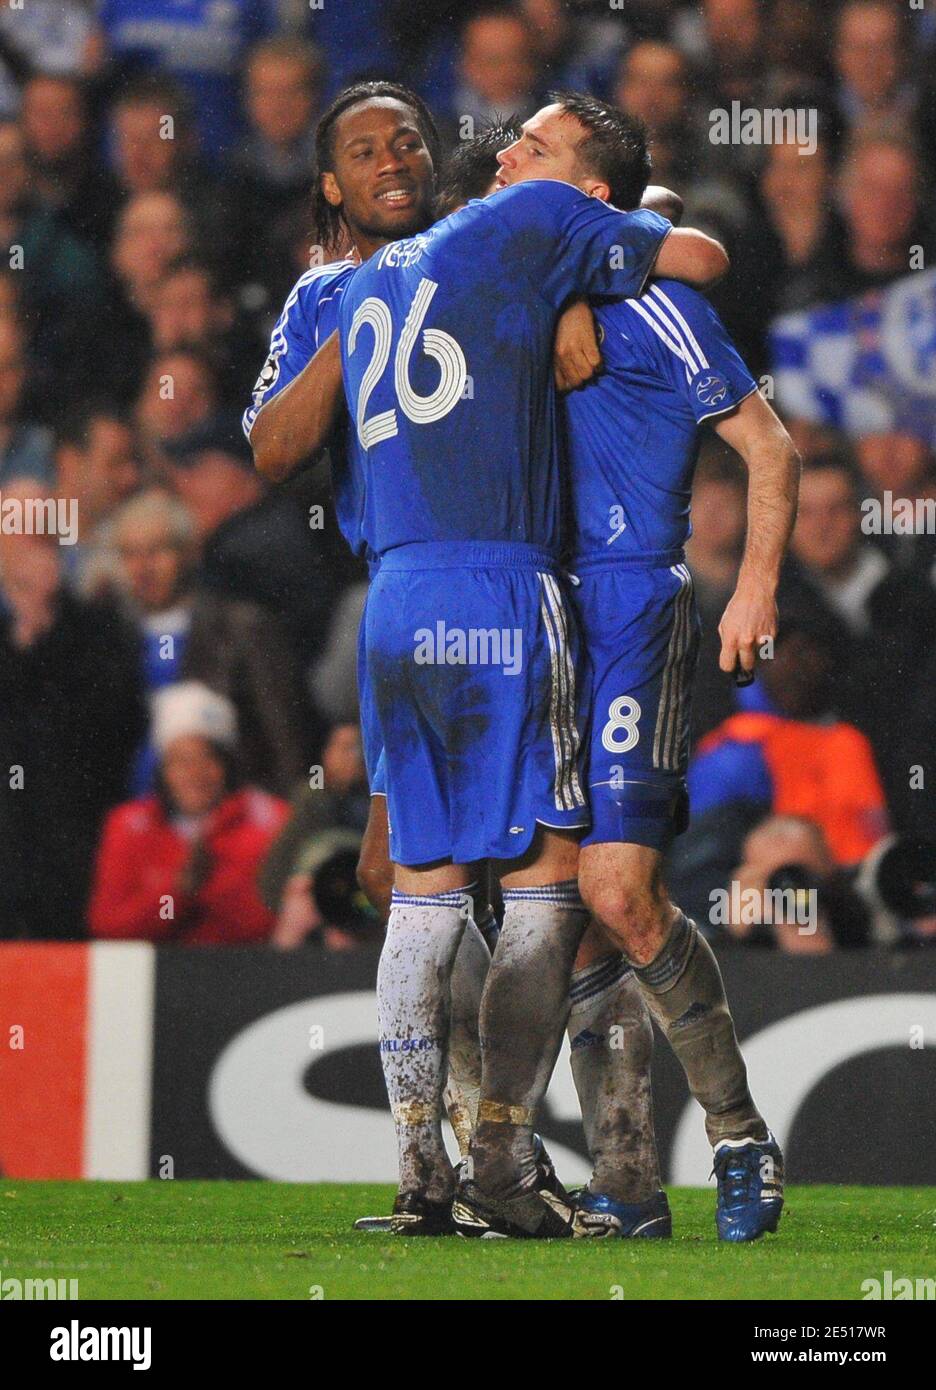 Chelsea's John Terry and Didier Drogba have hailed Frank Lampard after the England midfielder's penalty helped Chelsea to reach their first ever Champions League finalduring the UEFA Champions League Soccer match, Semi Final, Second Leg, Chelsea vs Liverpool at the Stamford Bridge in London, UK on April 30, 2008. Chelsea won 3-2. Photo by Steeve McMay/Cameleon/ABACAPRESS.COM Stock Photo